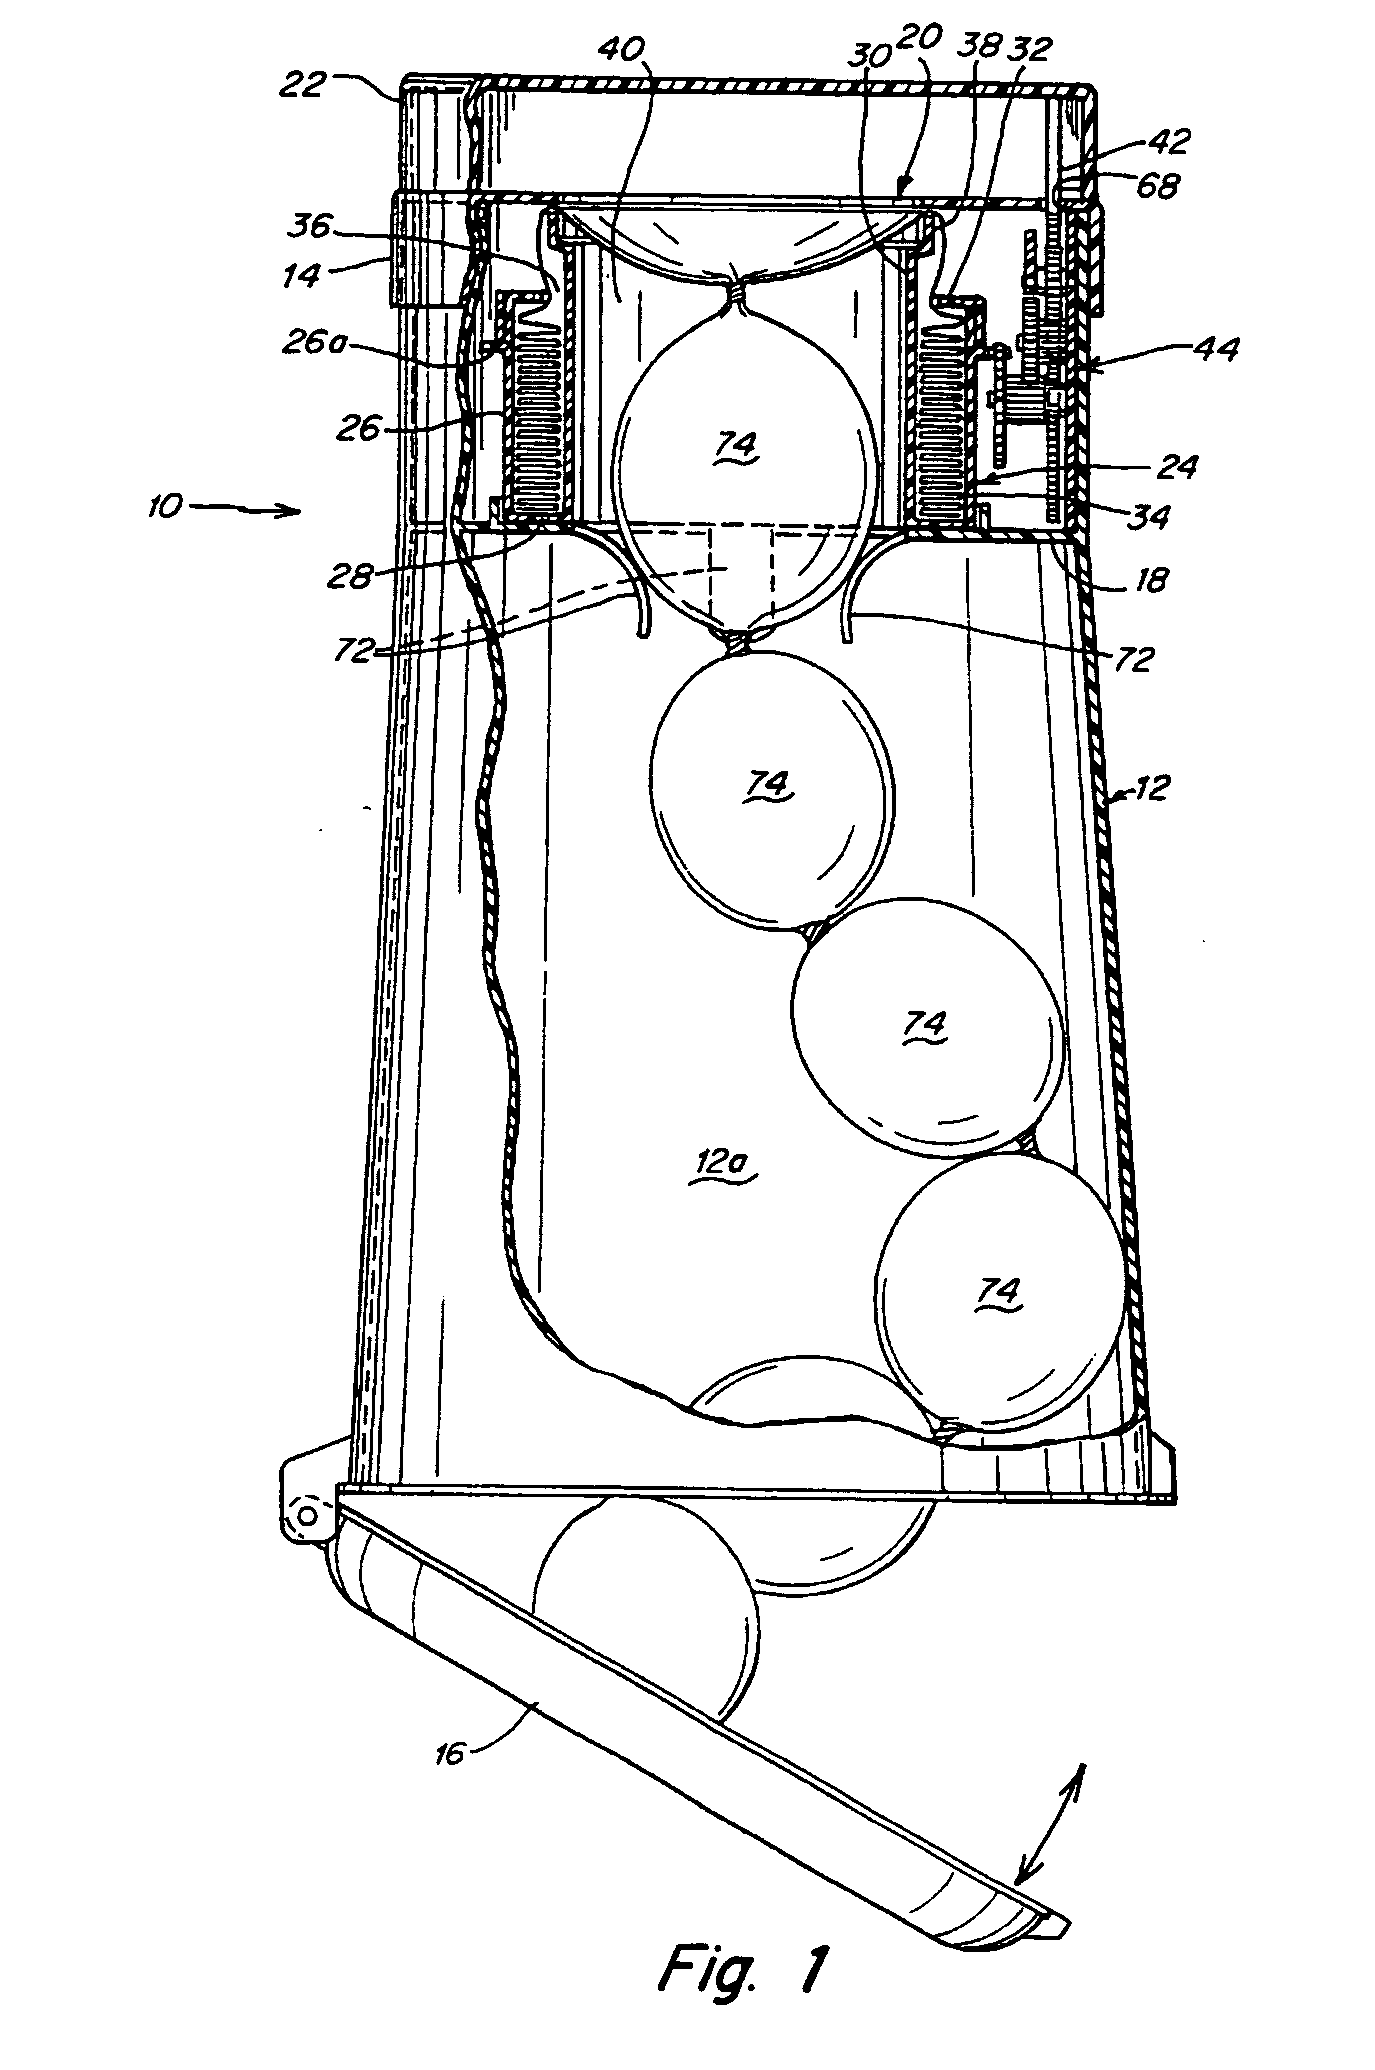 Waste disposal device including rotating cartridge coupled to hinged lid